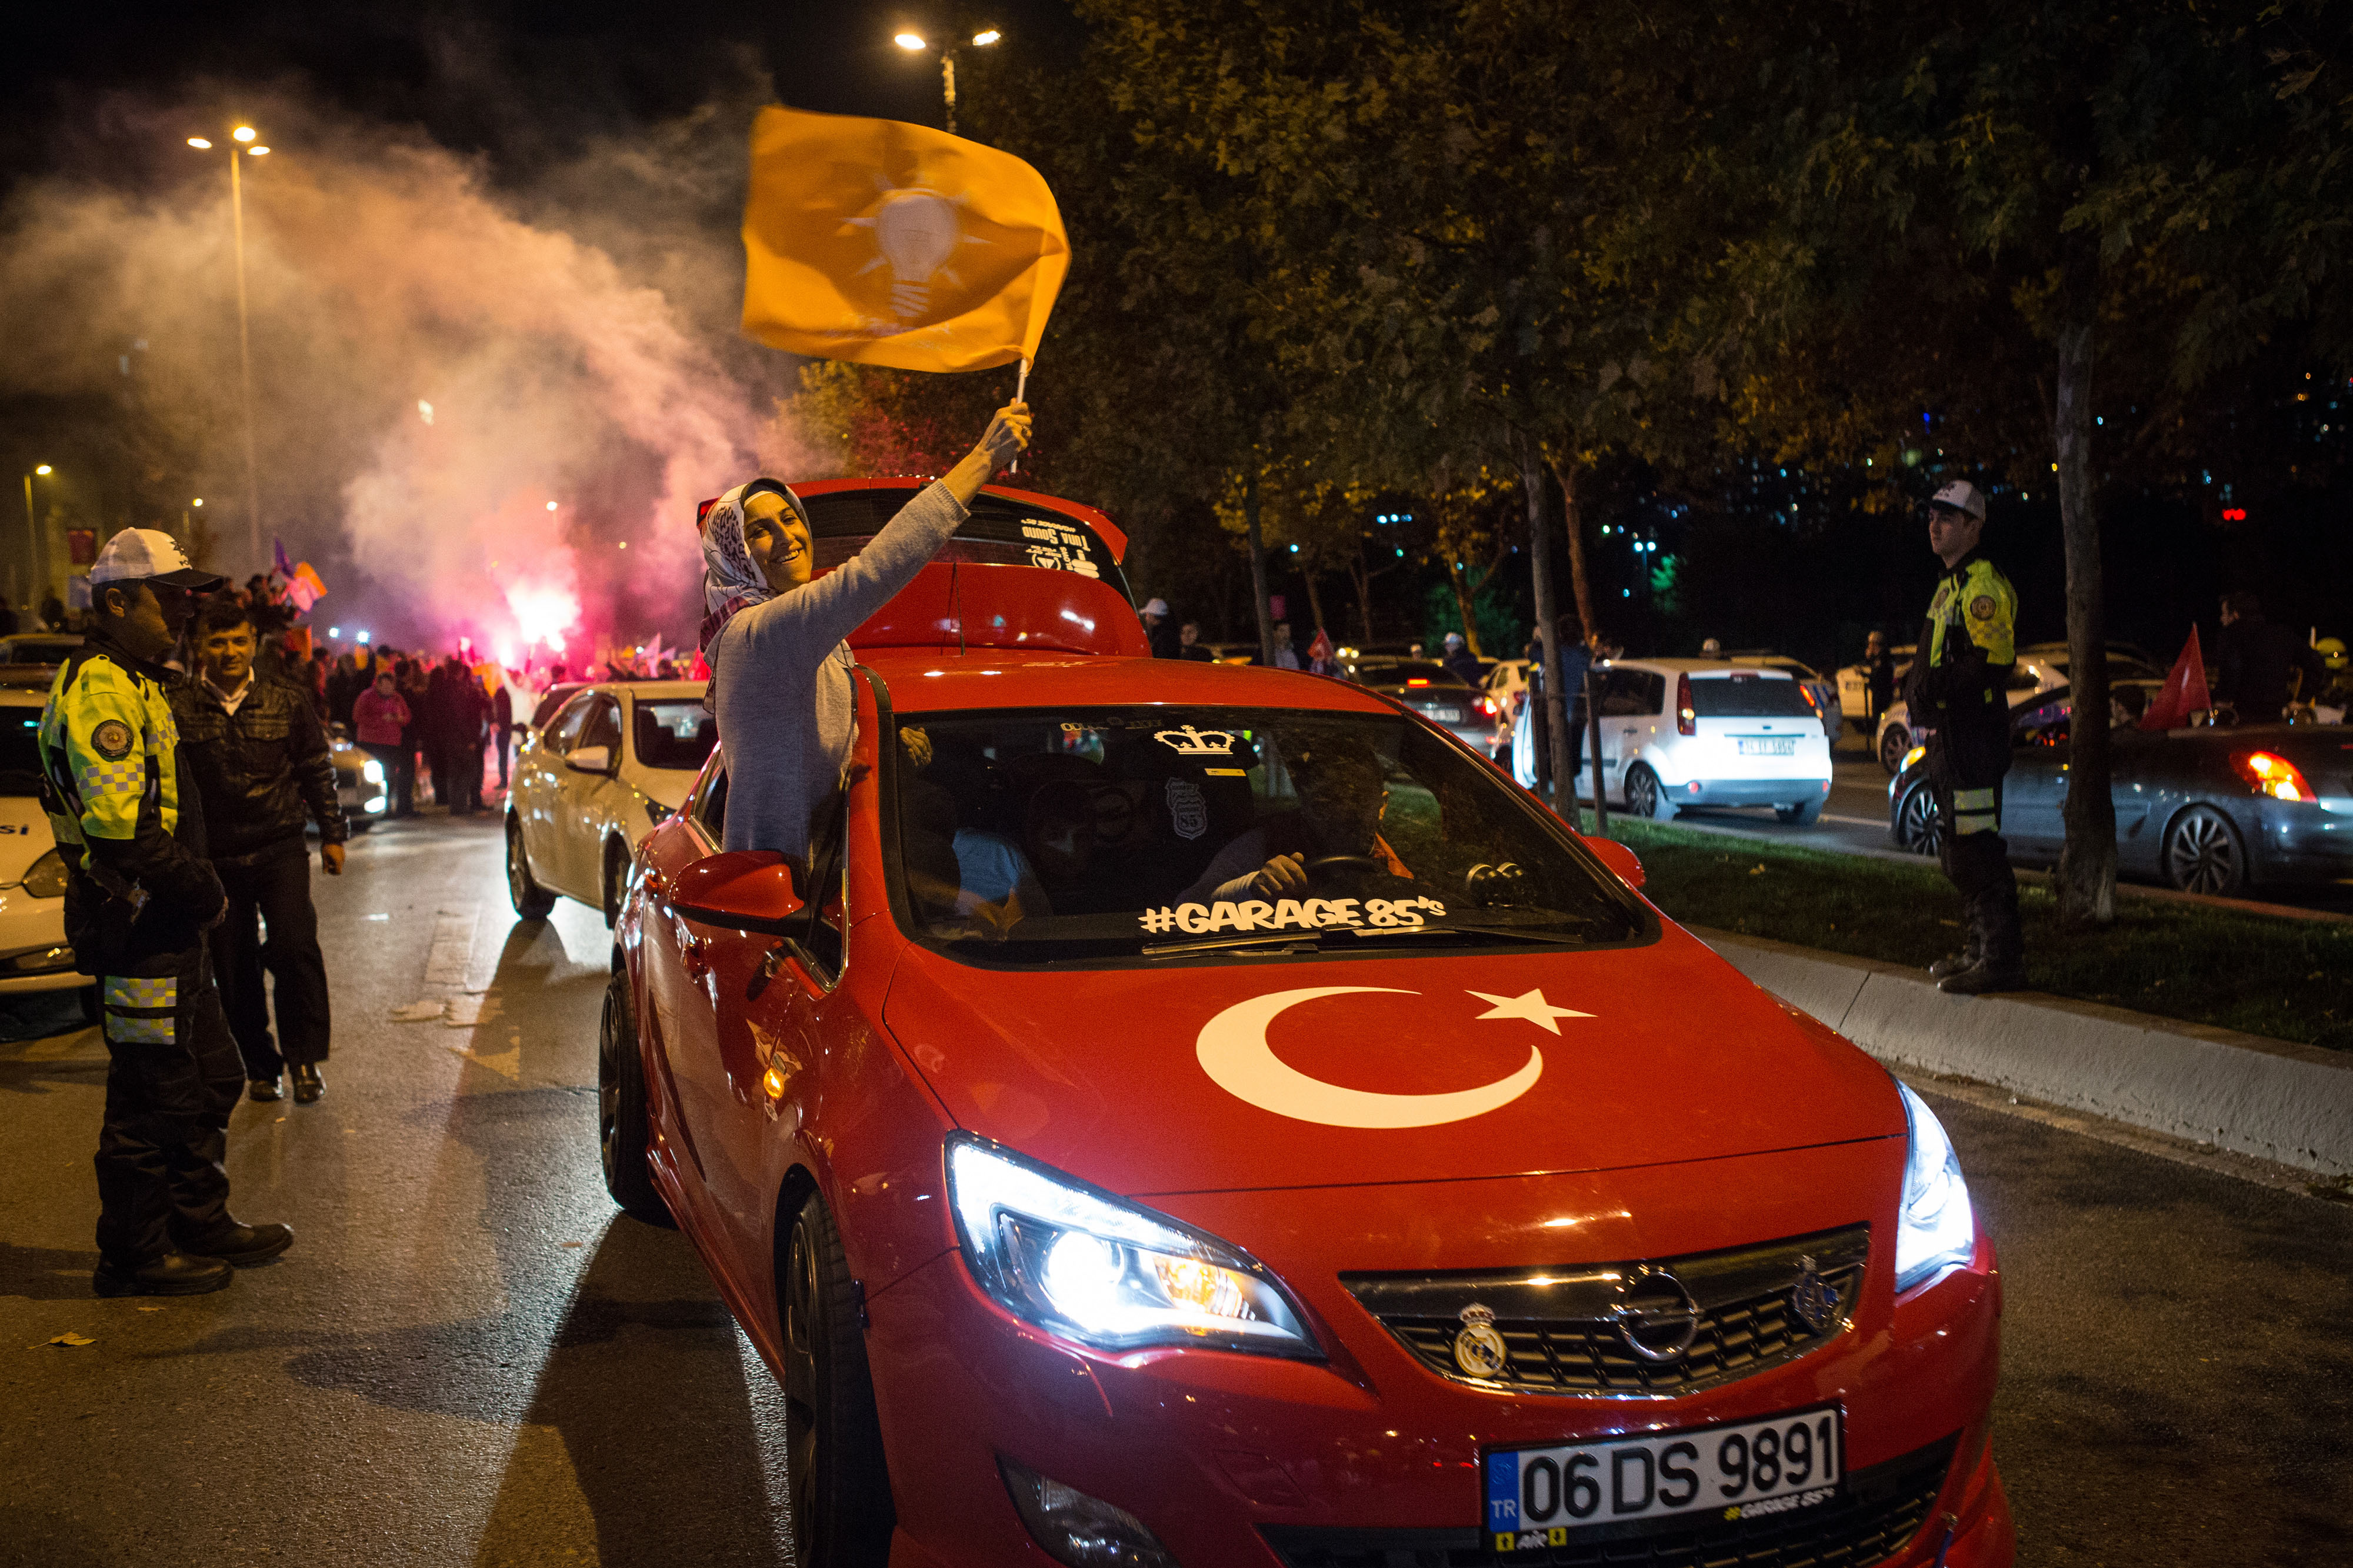 Supporters of the Justice and Development Party, also known as AK Party or AKP, celebrate following the result of the Turkish general election in Istanbul, Turkey, on Sunday, Nov. 1, 2015. Turkeys AK Party swept back into office in parliamentary elections, strengthening President Recep Tayyip Erdogans 13-year grip on power after a divisive campaign scarred by violence. Photographer: Kerem Uzel/Bloomberg